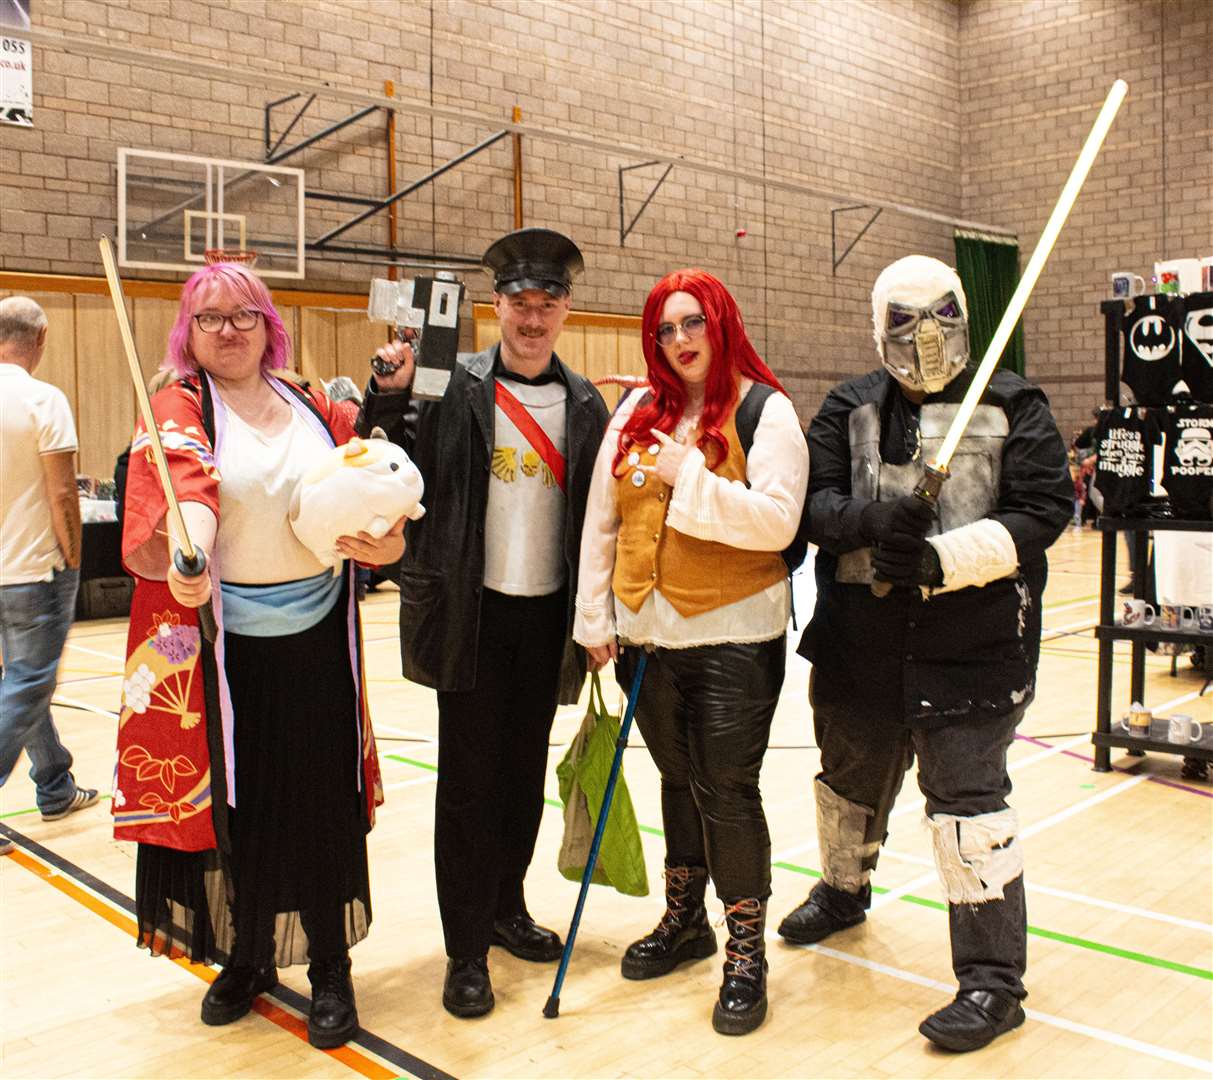 Eorzea's Okayest Samurai (Charleigh-Ann Burn from Culloden), Warhammer 40k Commissar (Alan Munro from Inverness), Grill Sutcliffe from Black Butler (Hartlee Grant from Inverness), Sith Lord (Calum Sinclair from Halkirk). Photo: Niall Harkiss